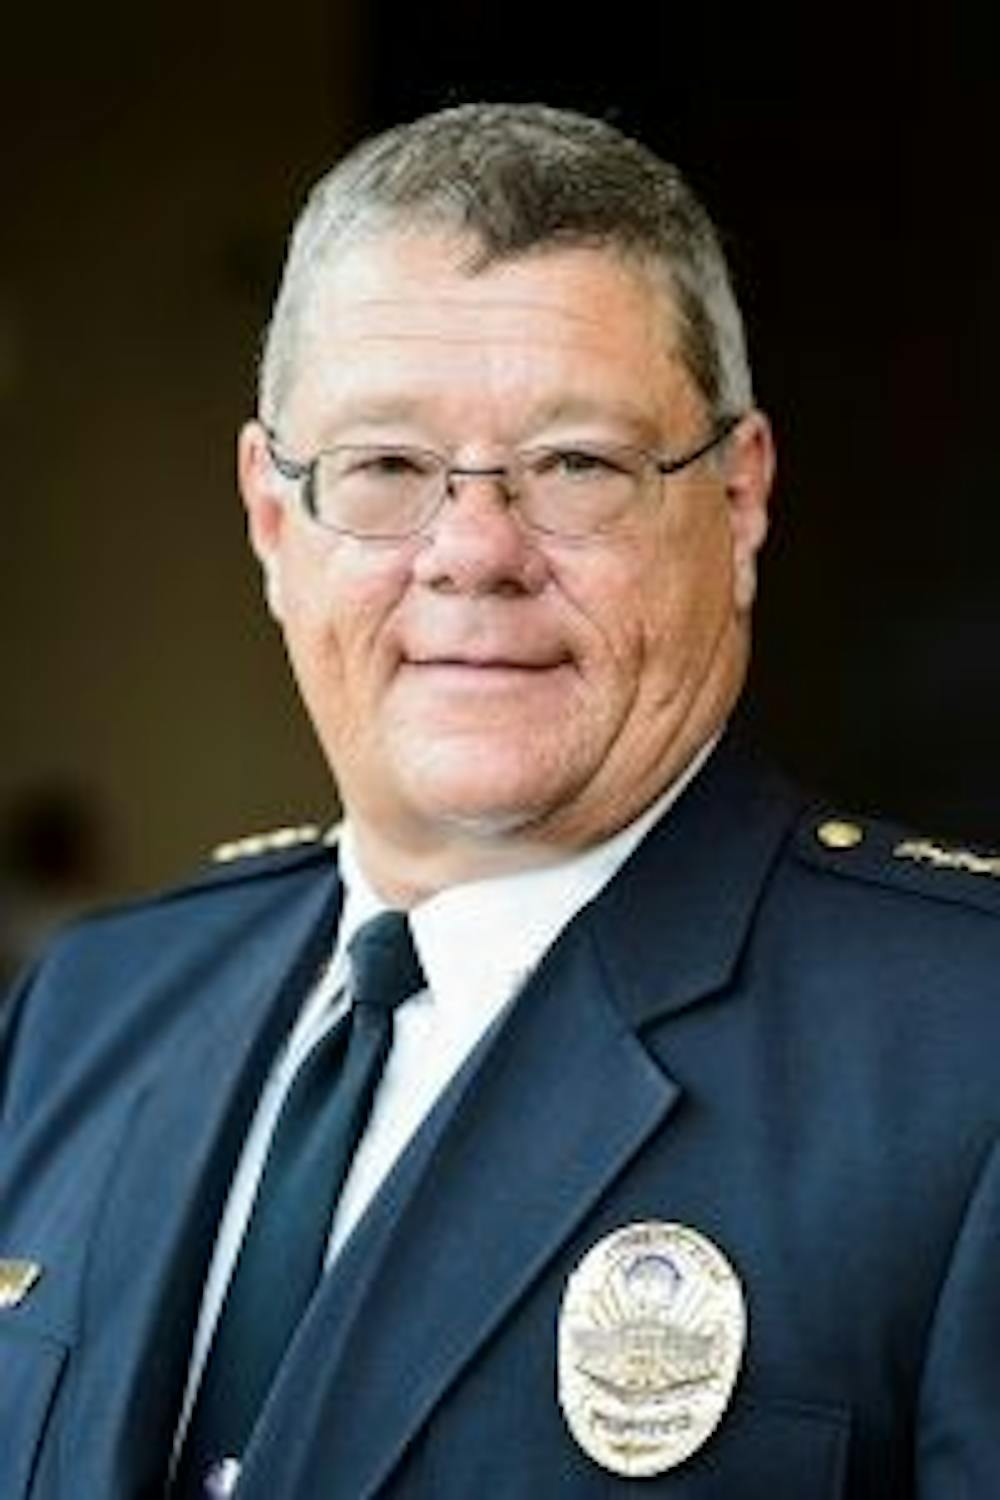 UWPD Assistant Chief Brian Bridges will retire Wednesday after 32 years at UW-Madison.